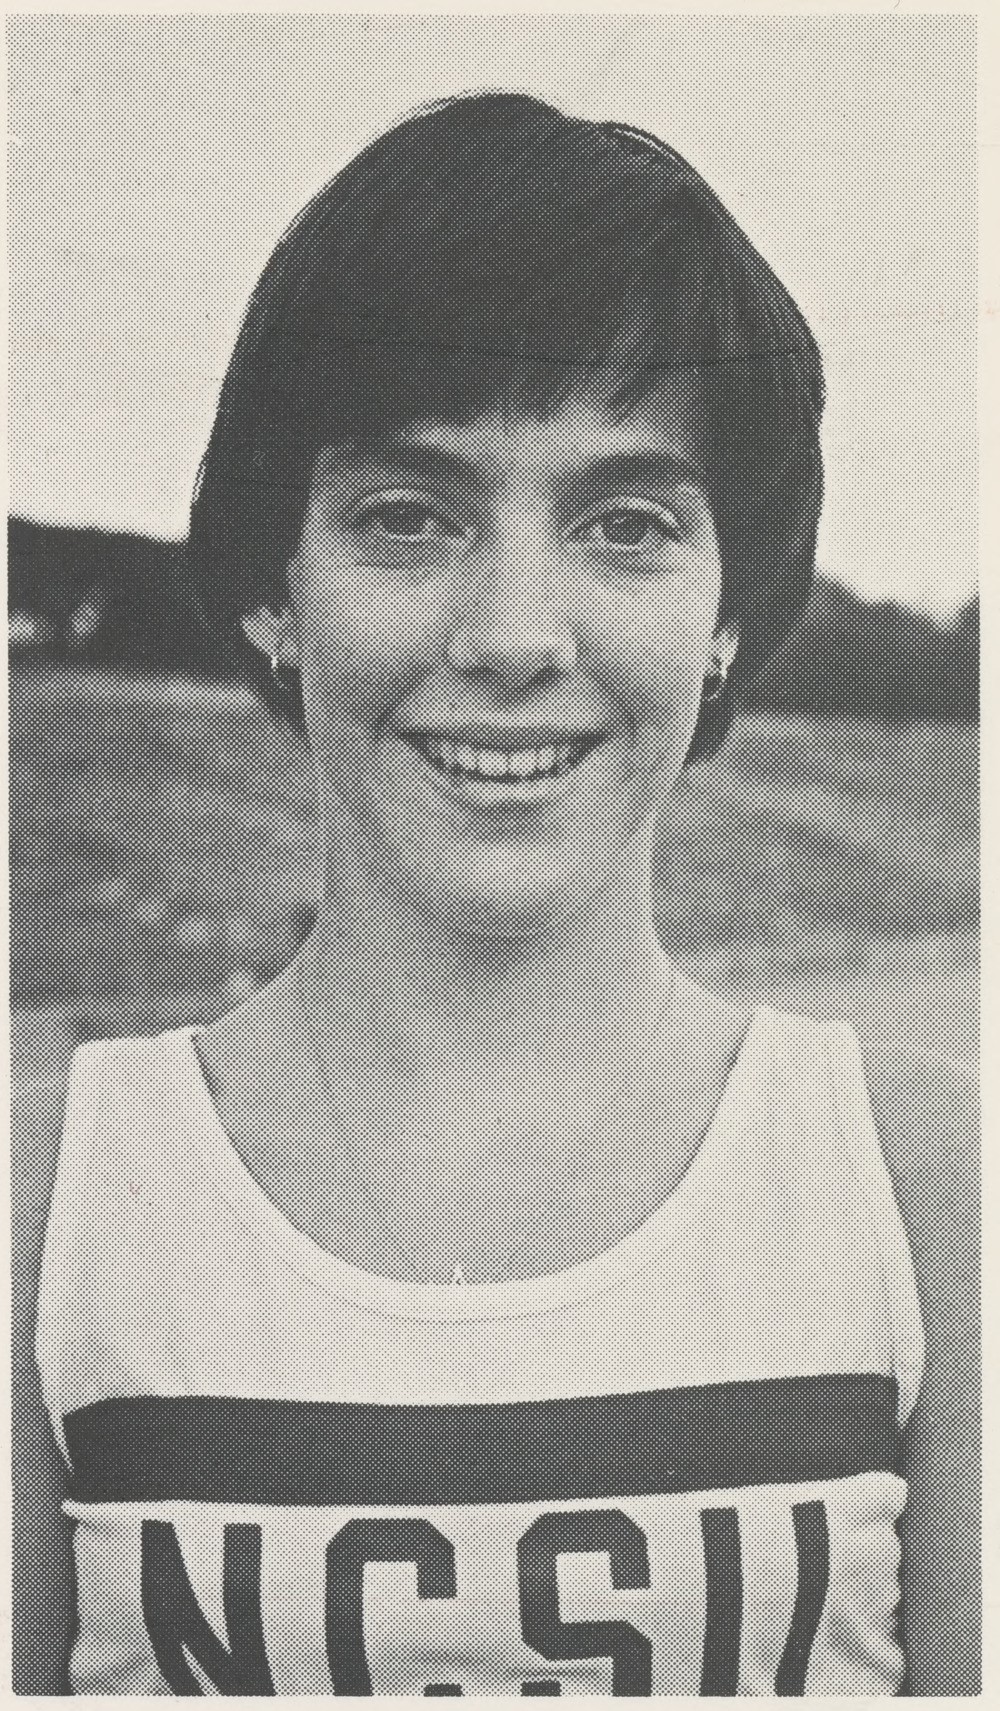 Black and white photo of Joan Benoit from the 1978 media guide.